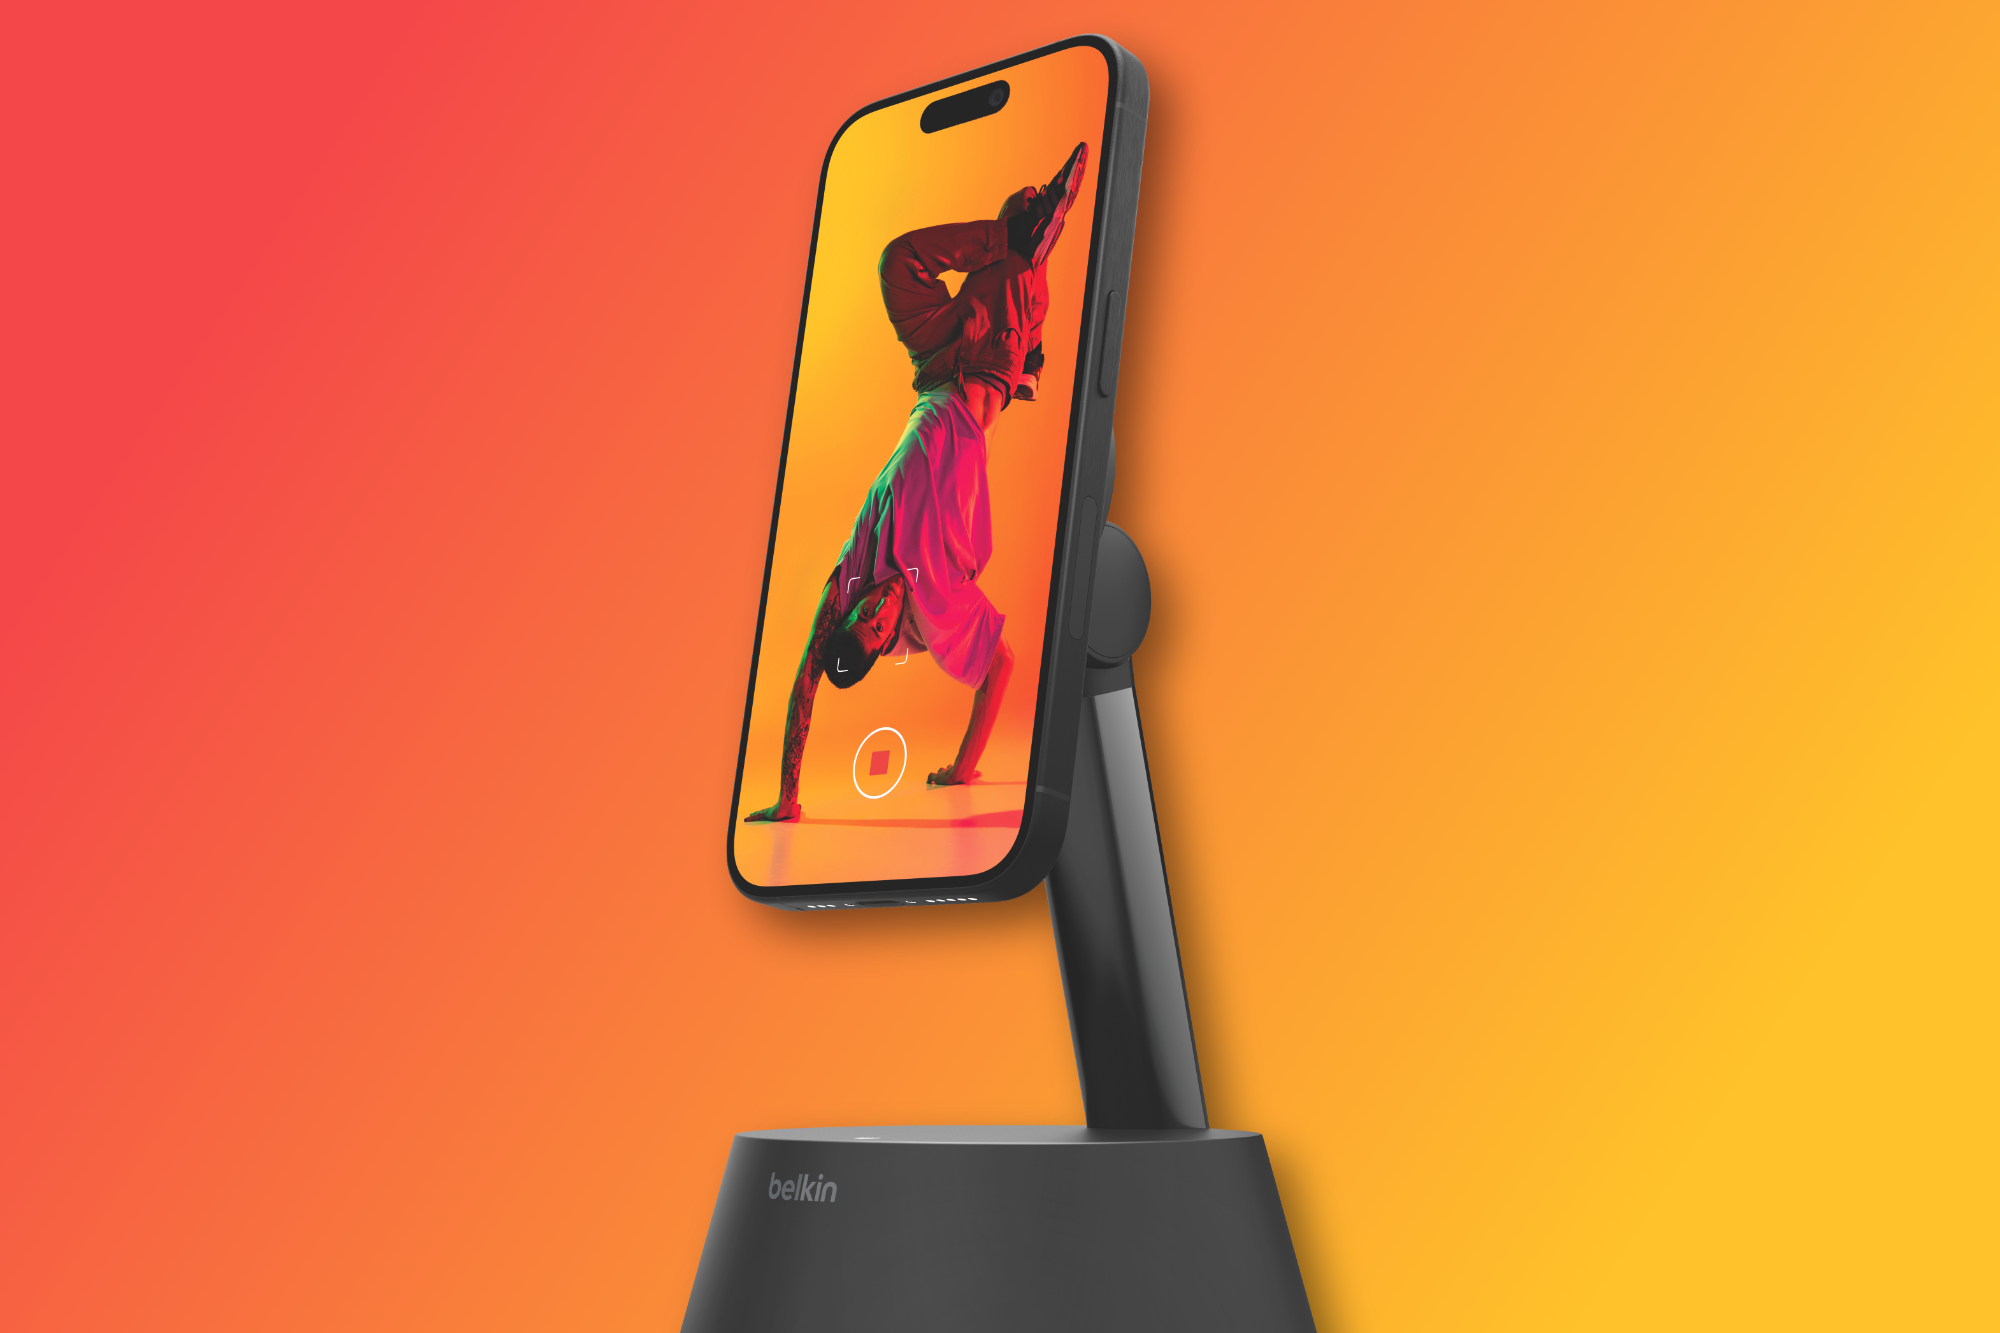 A render of the Belkin Auto-Tracking Stand Pro.